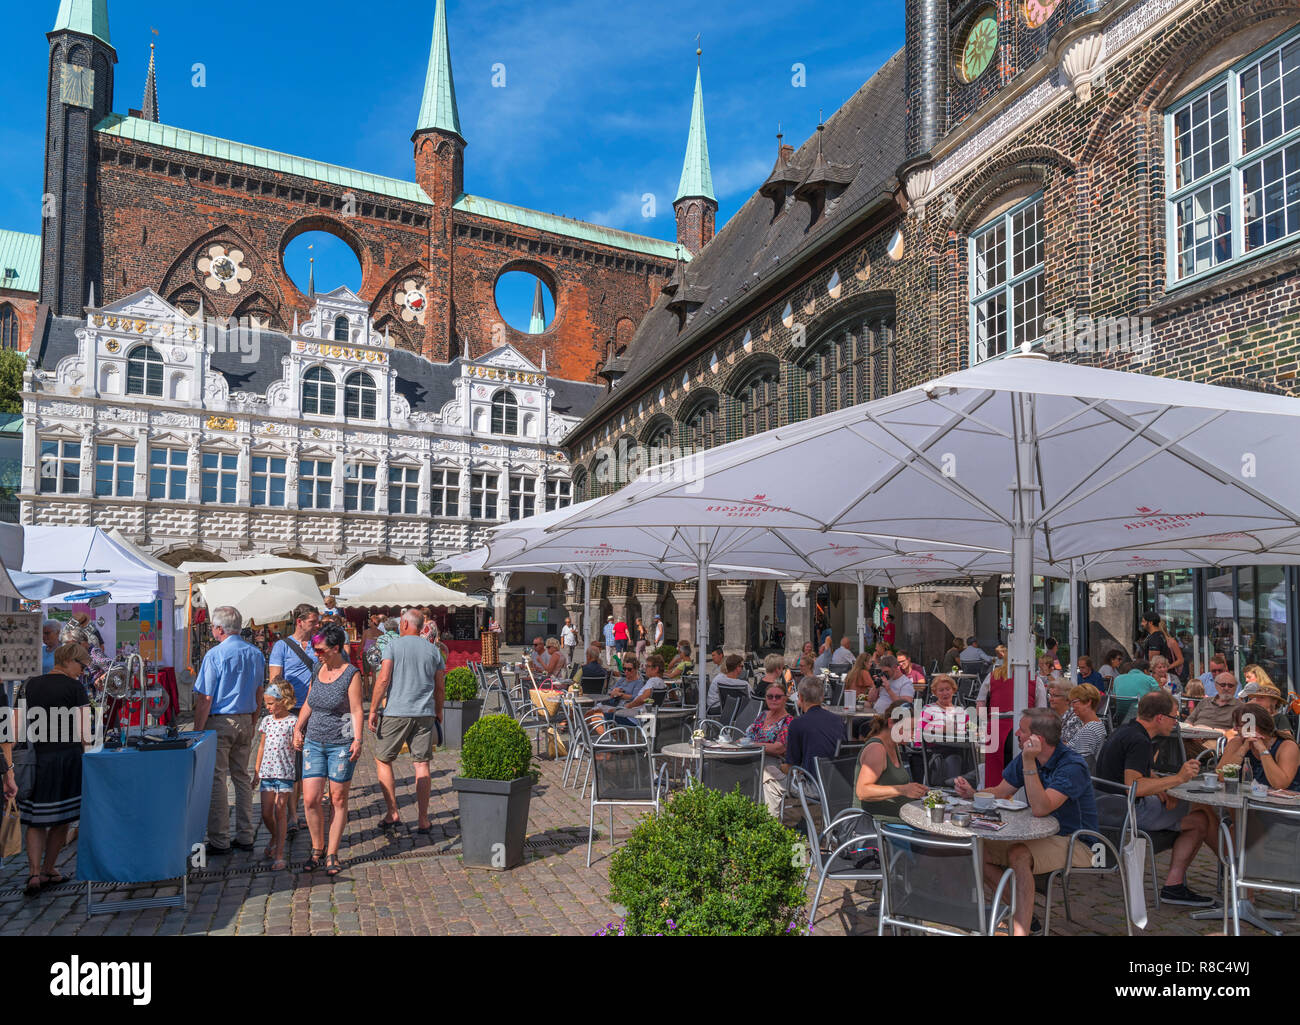 Cafe in front of the historic 13th century Rathaus (Town Hall), Markt, Lubeck, Schleswig-Holstein, Germany Stock Photo